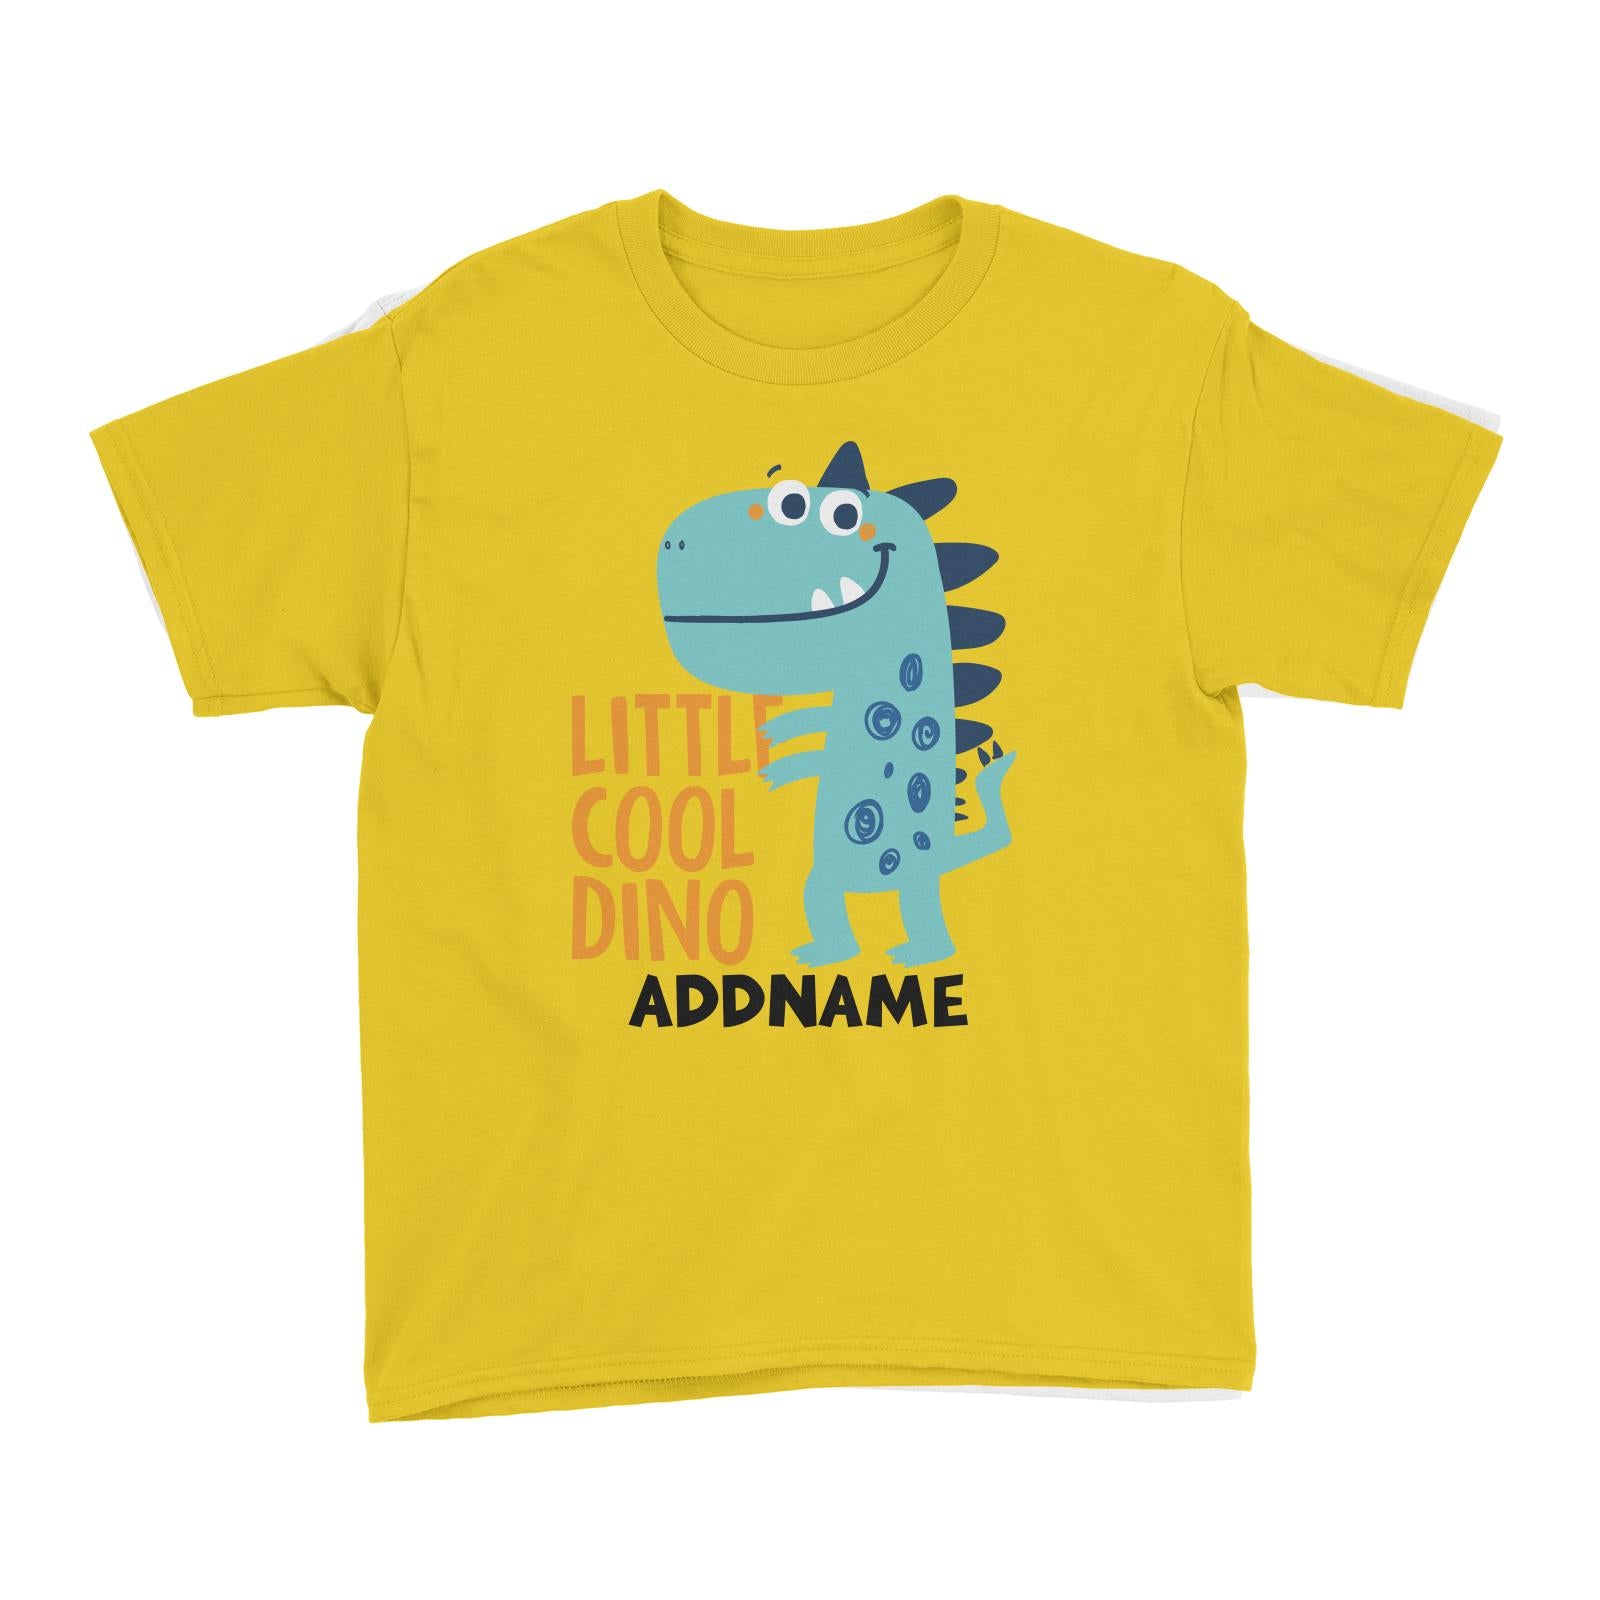 Little Cool Dino Addname Kid's T-Shirt